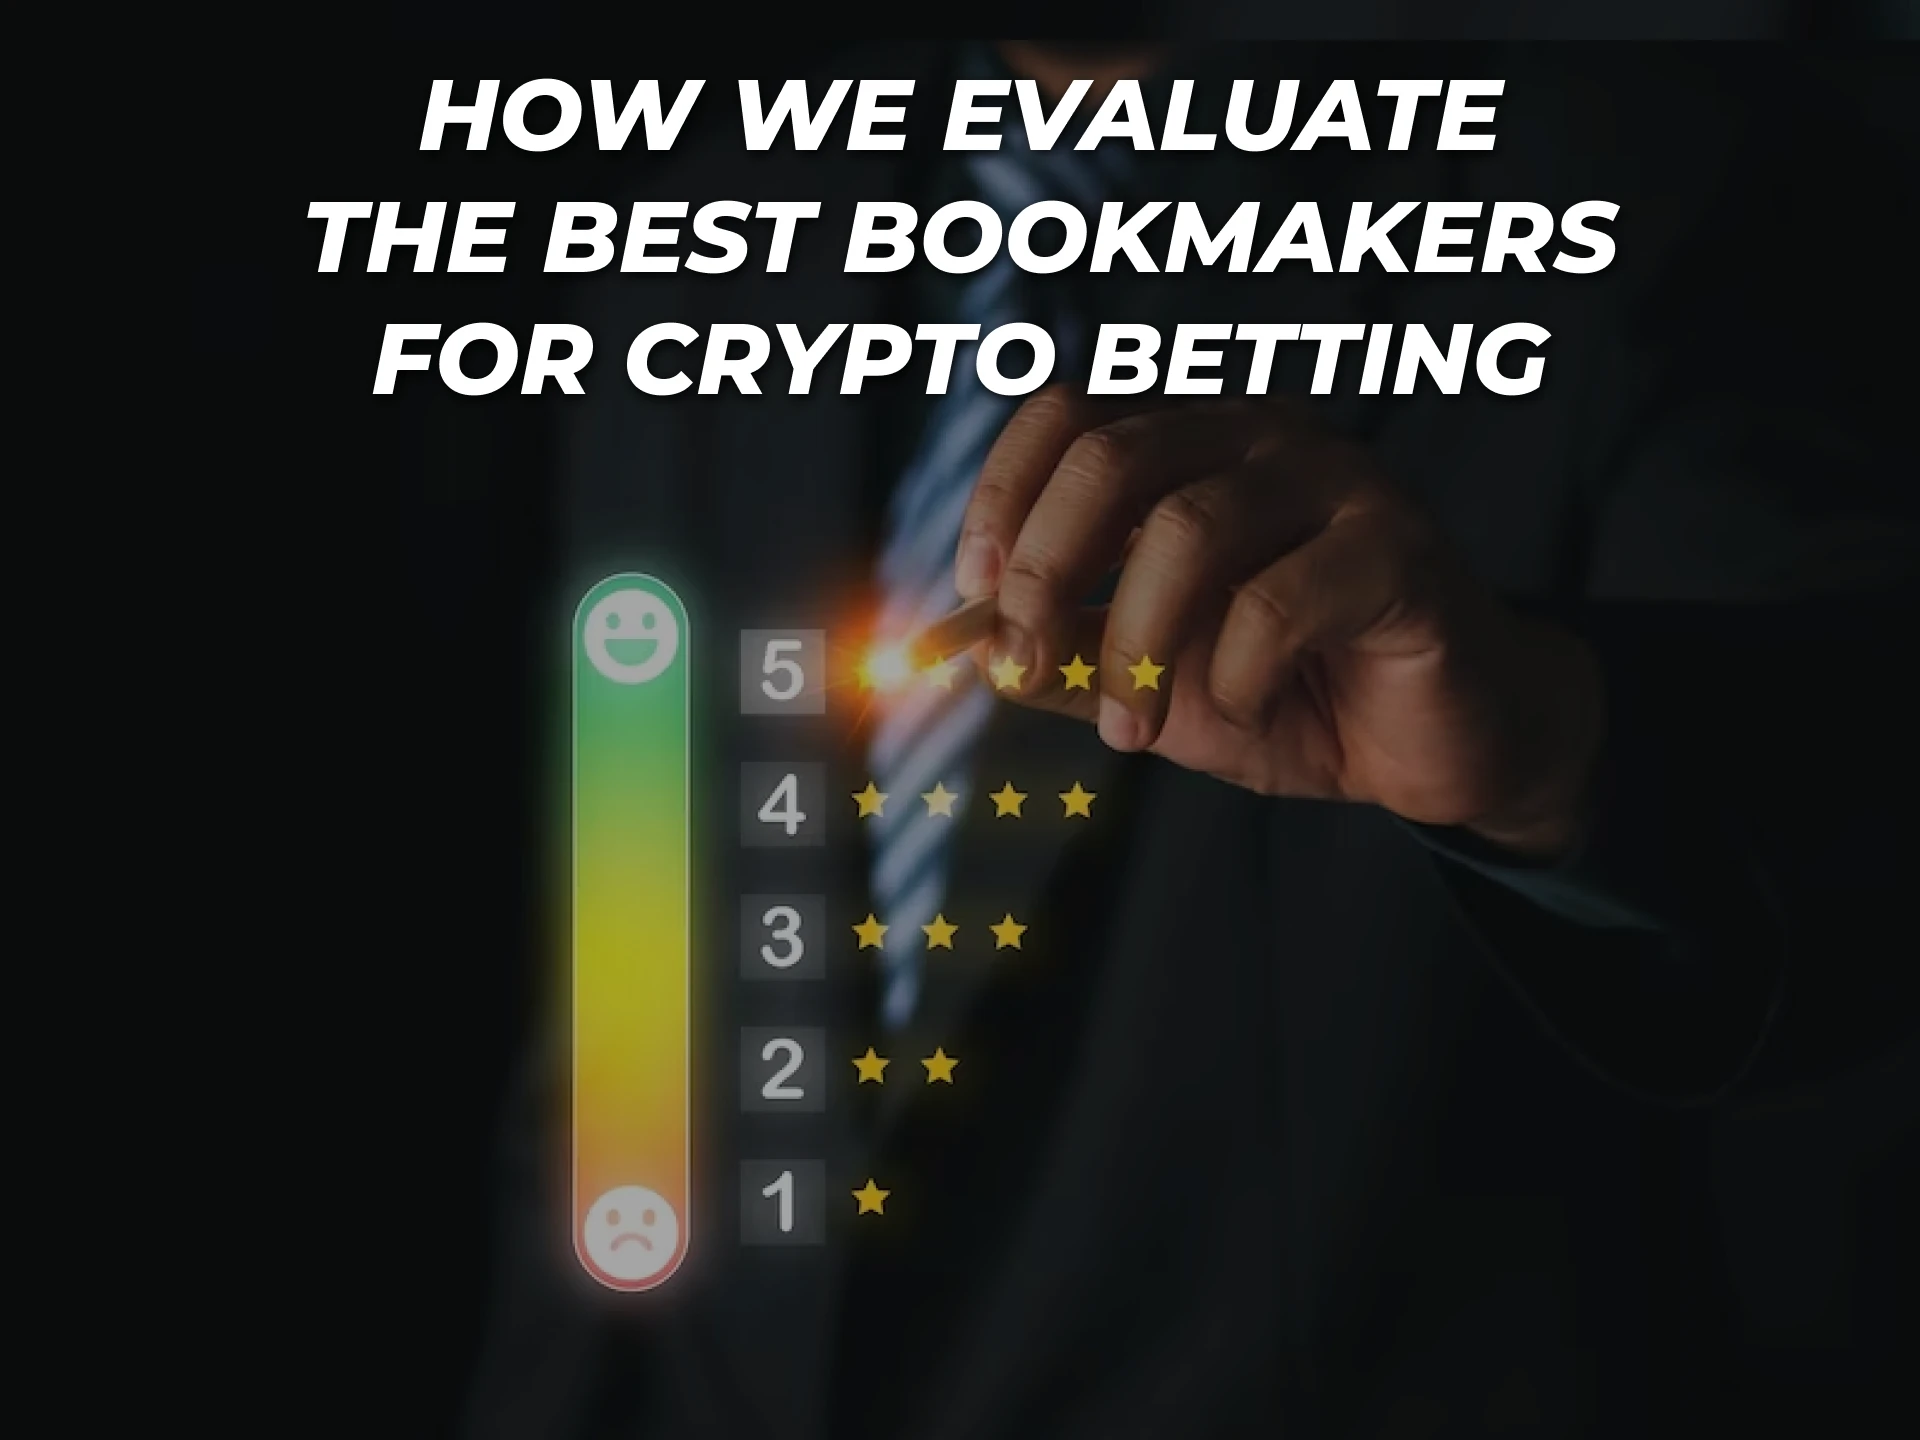 We compare many criteria to select the best bookmakers for crypto betting.